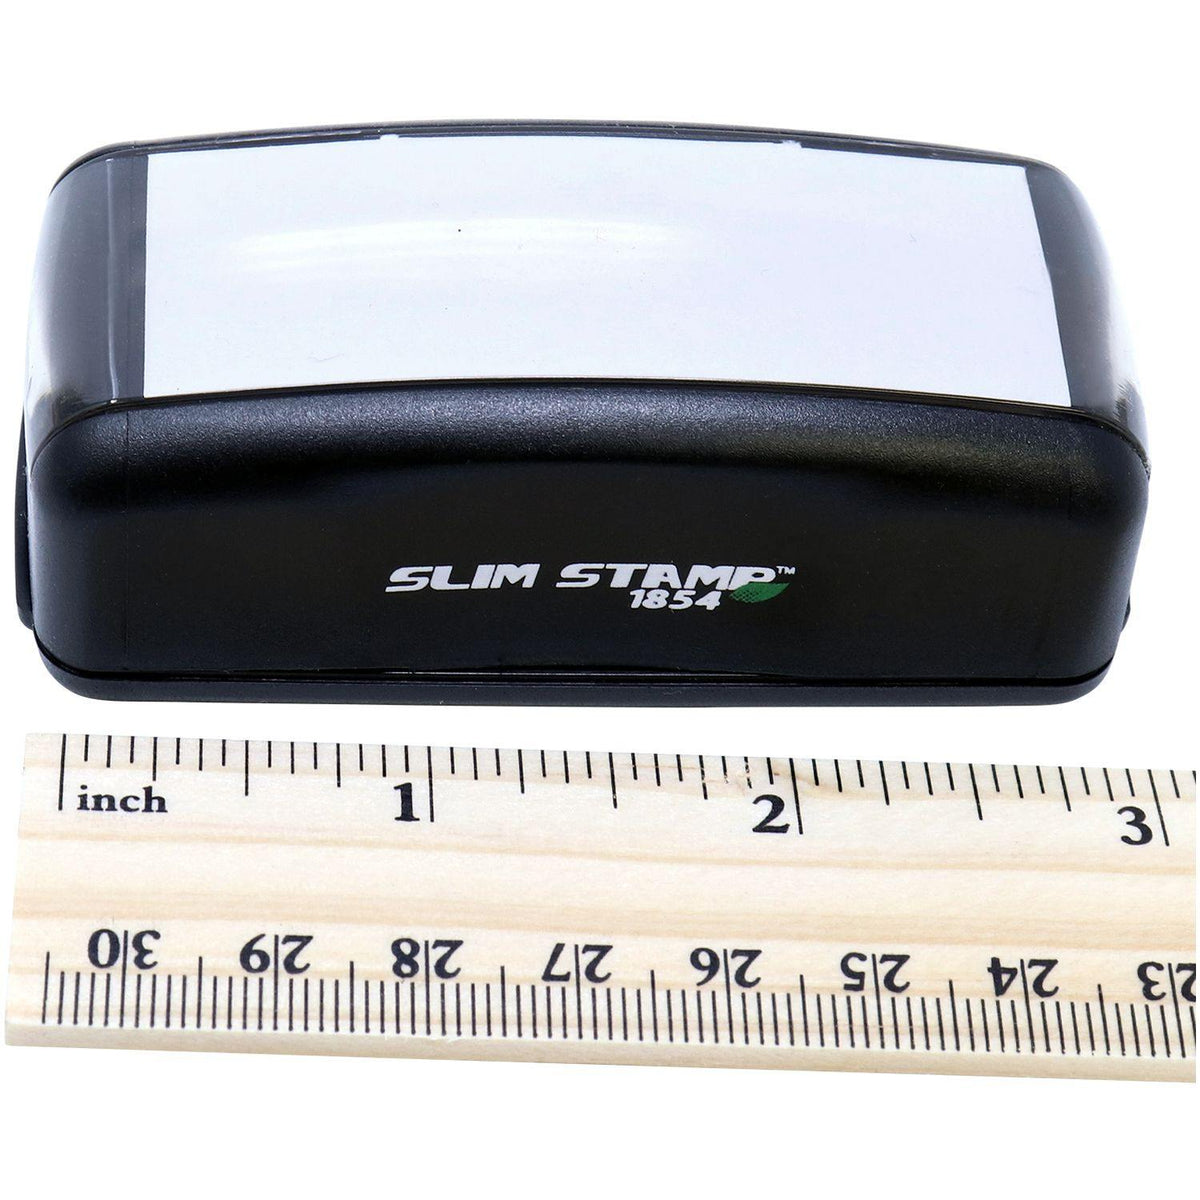 Measurement Large Pre-Inked Standard Mail Stamp with Ruler